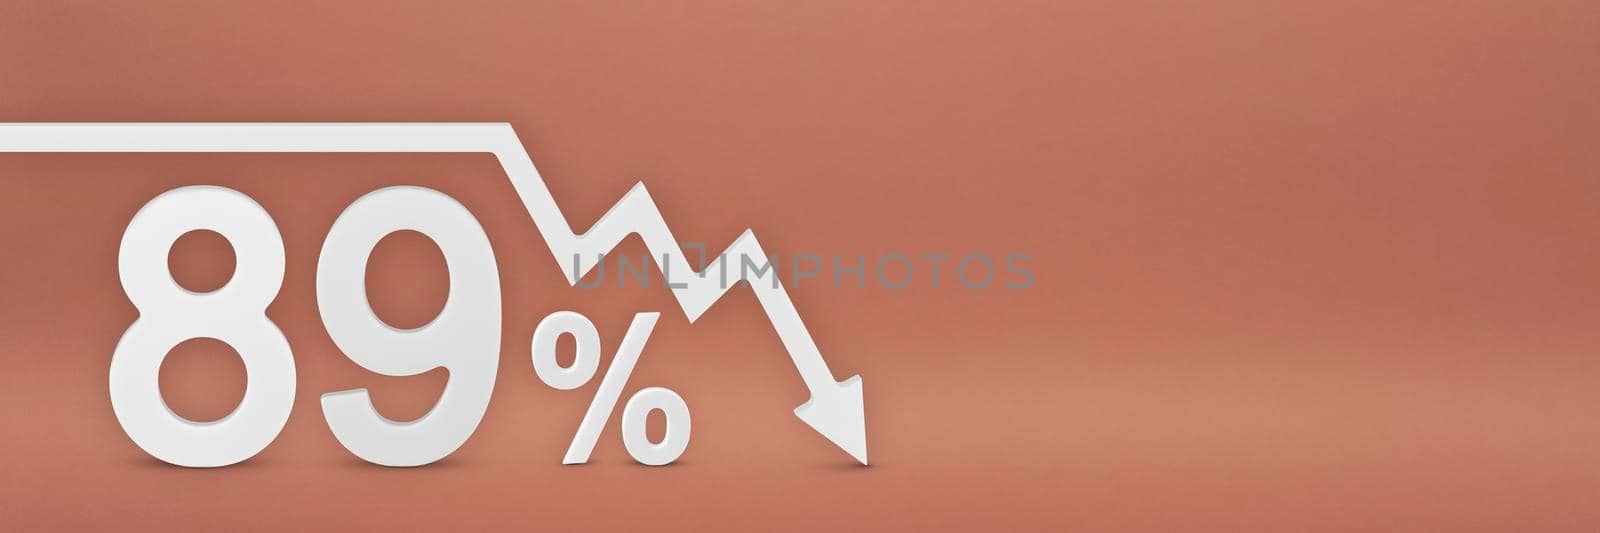 eighty-nine percent, the arrow on the graph is pointing down. Stock market crash, bear market, inflation.Economic collapse, collapse of stocks.3d banner,89 percent discount sign on a red background. by SERSOL